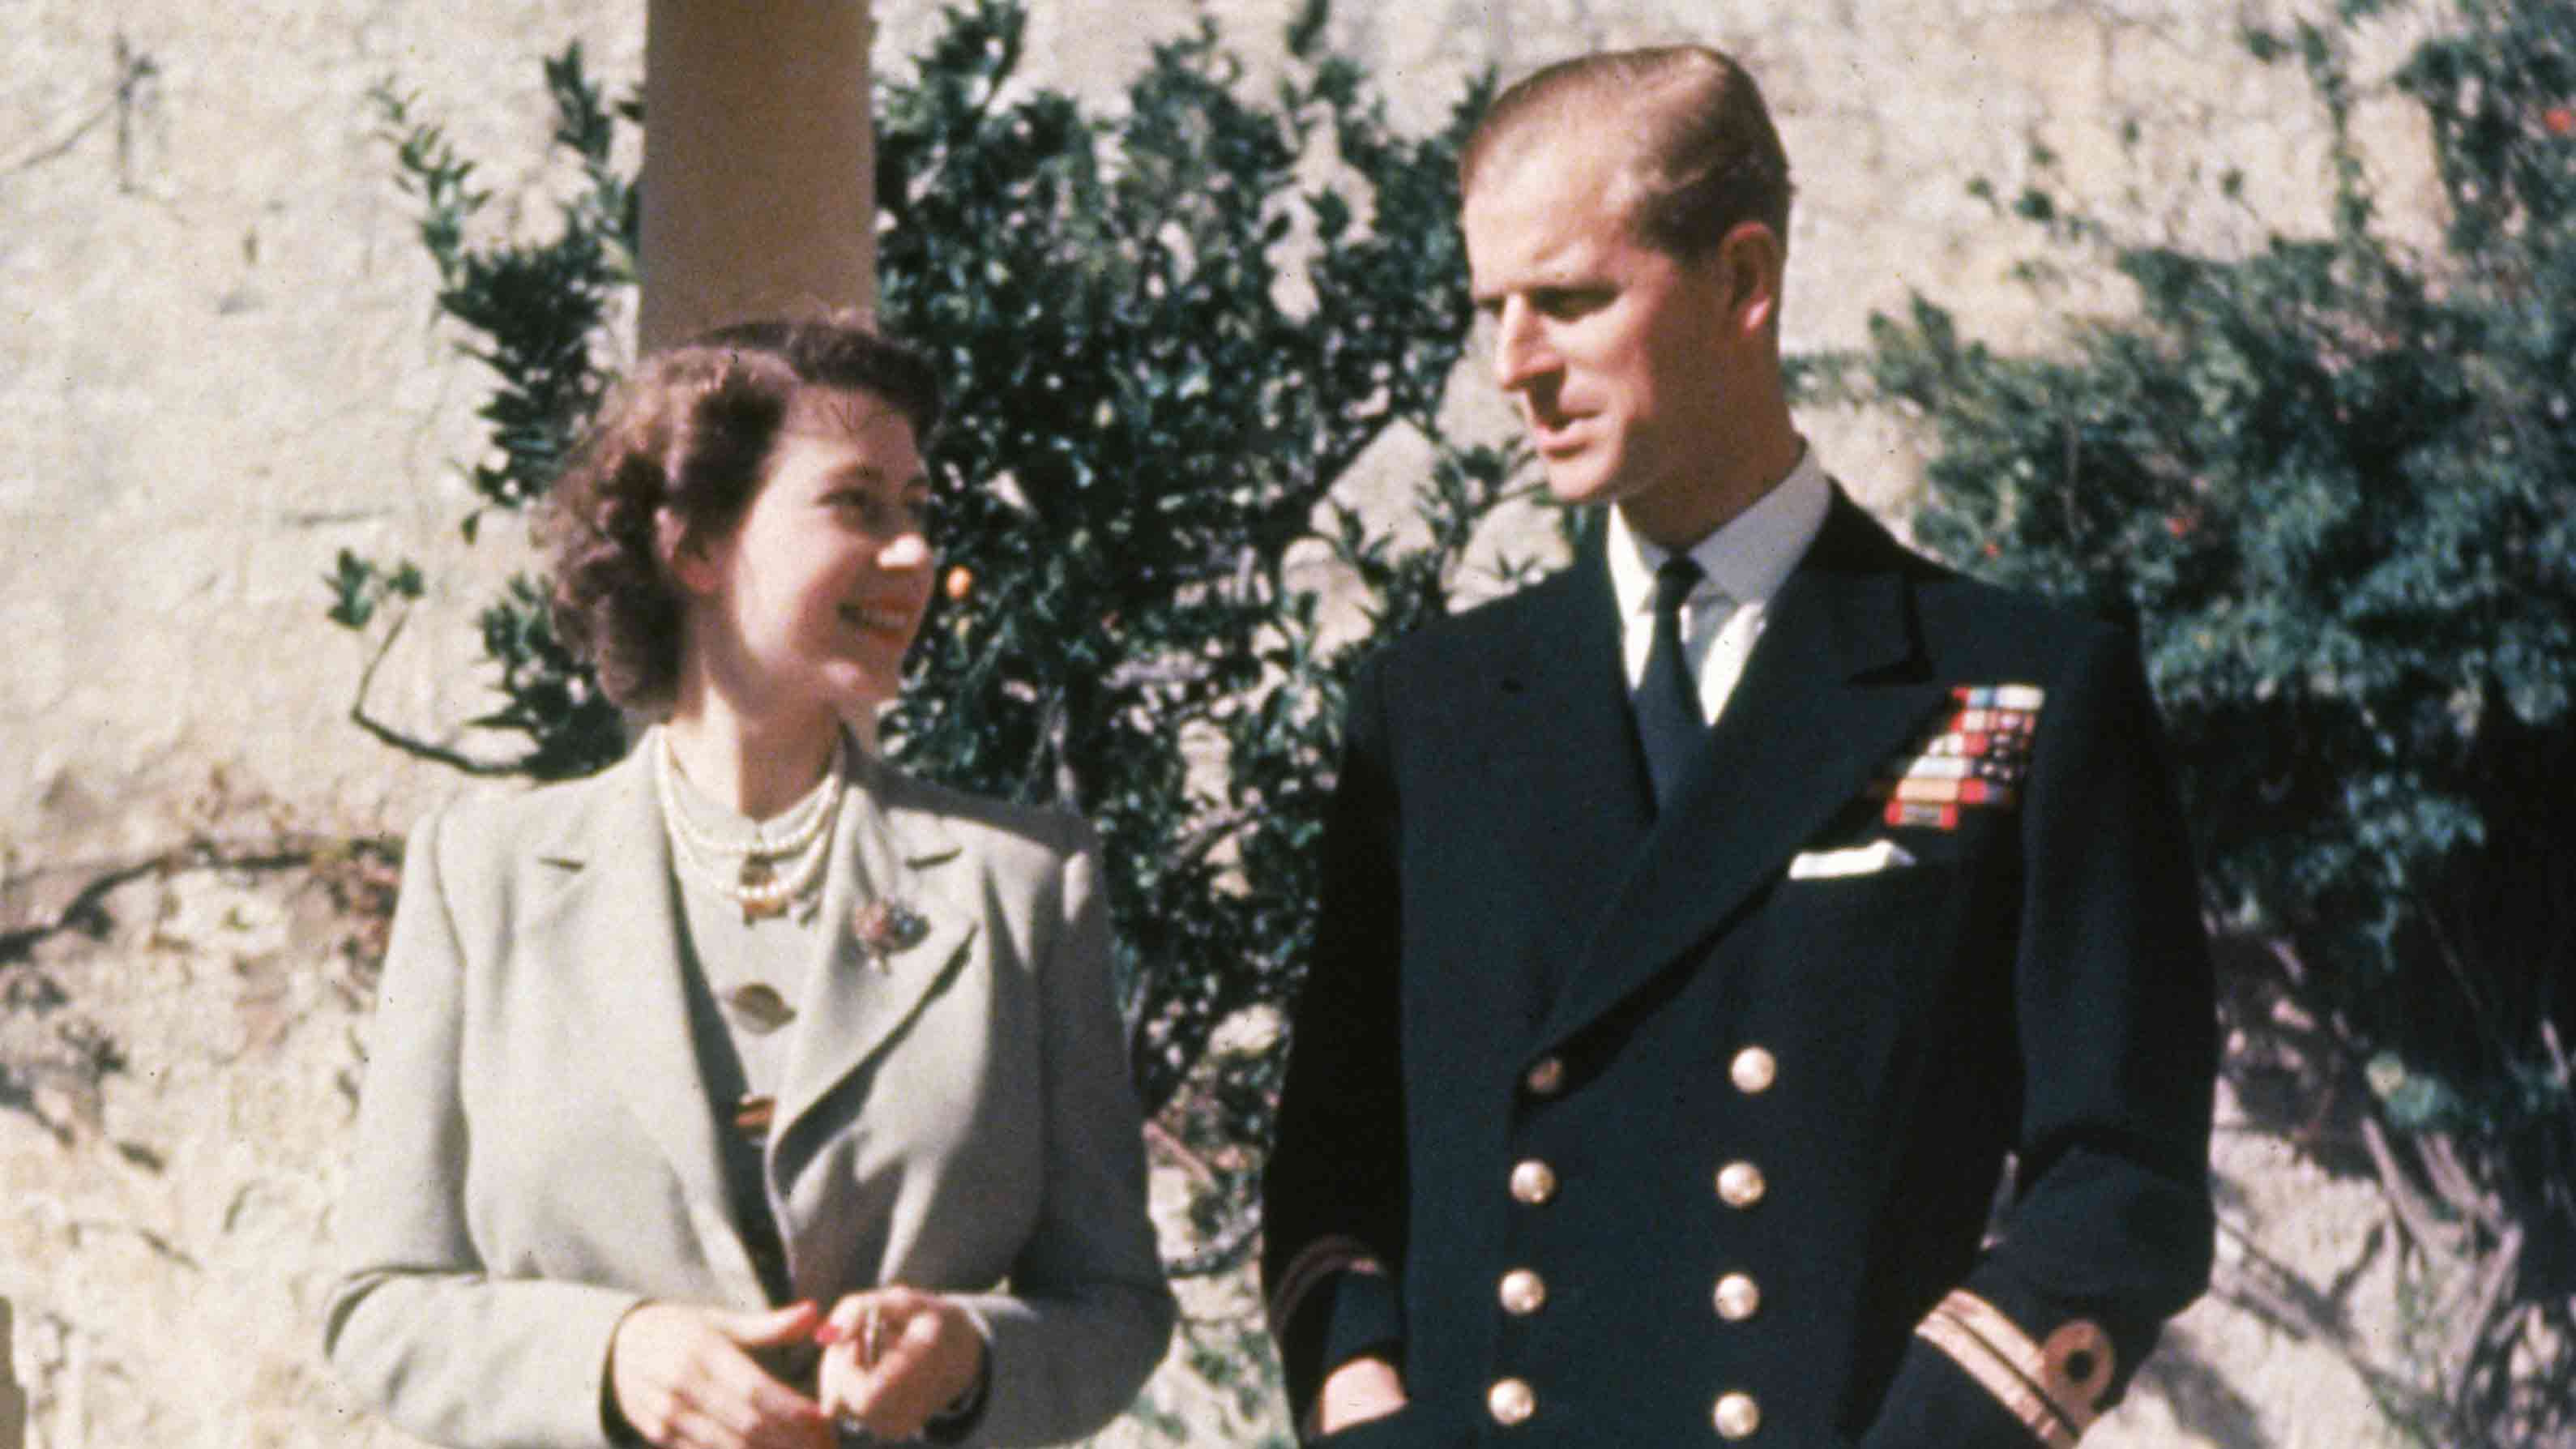 ROYAL SALE: The Queen and Prince Philip's first marital home goes under the hammer